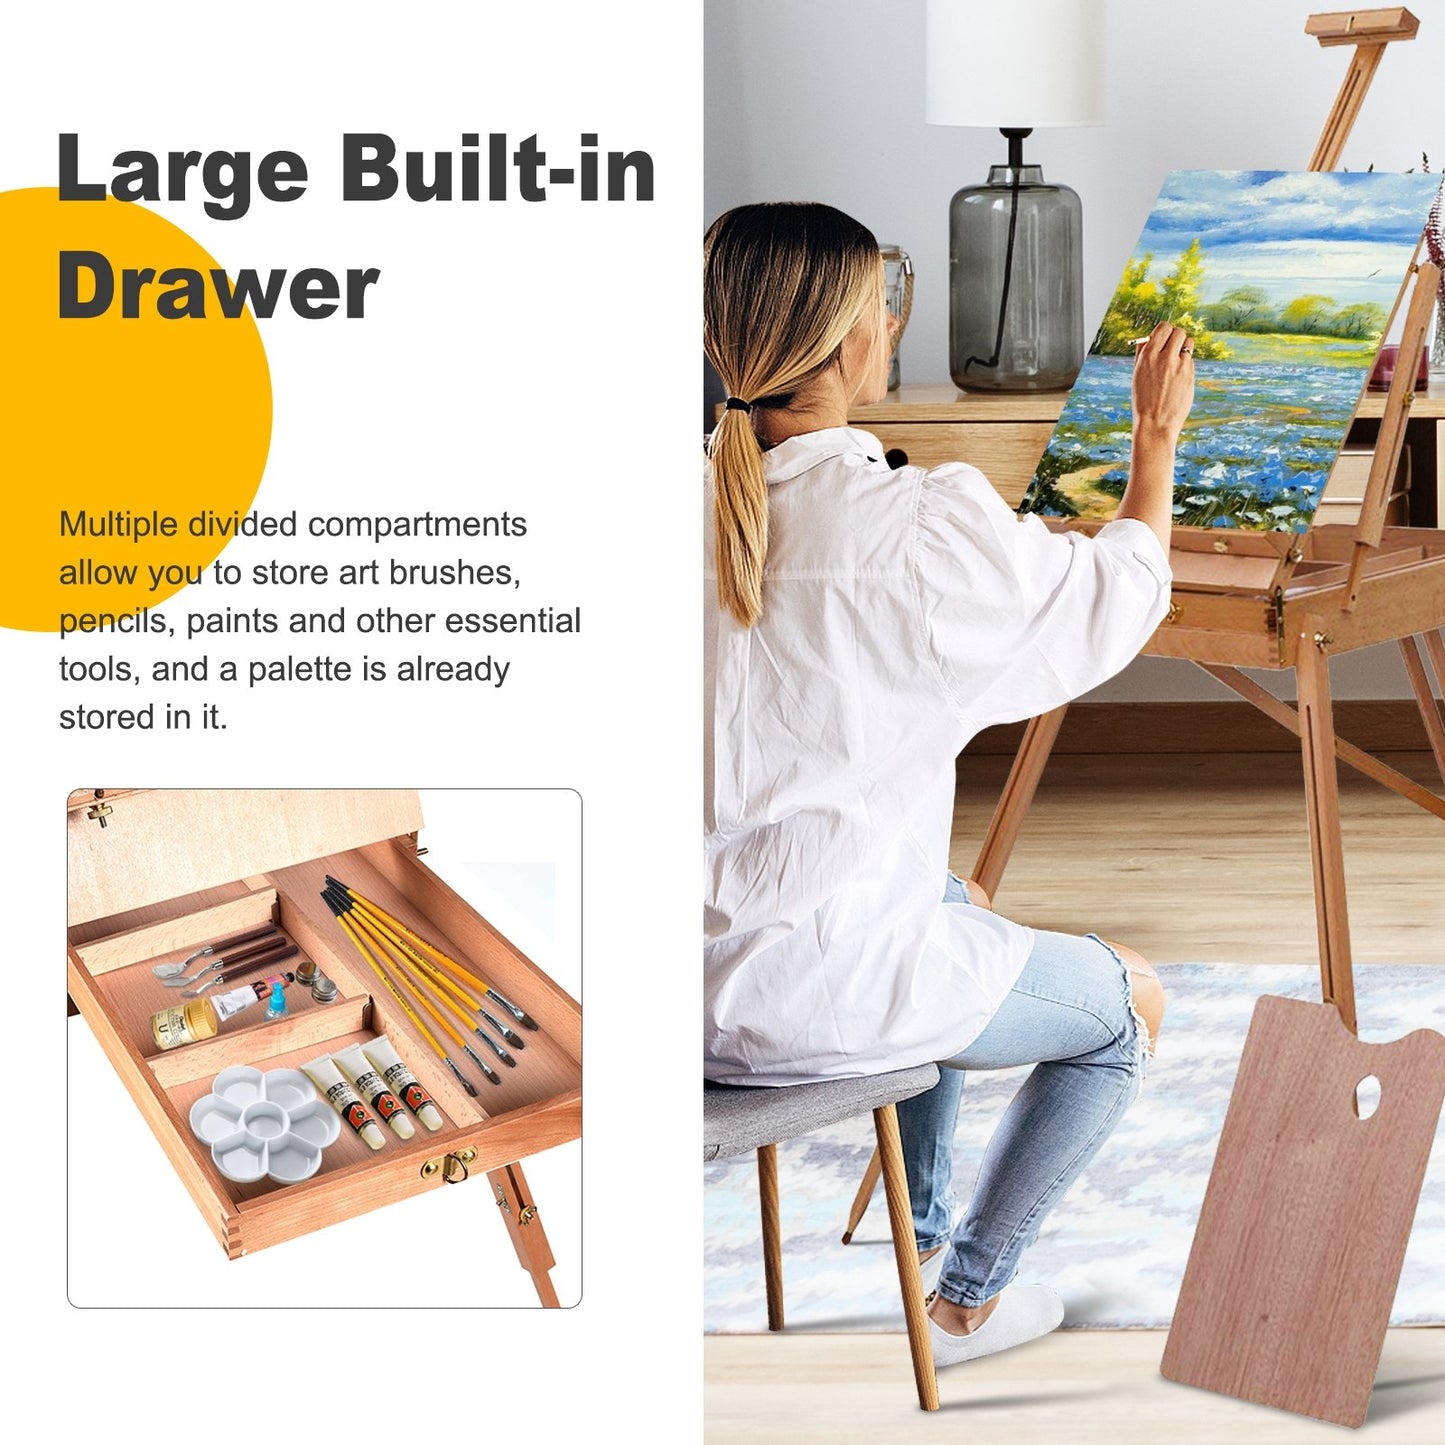 Tripod Folding French Wooden Easel with Sketch Box, Brown